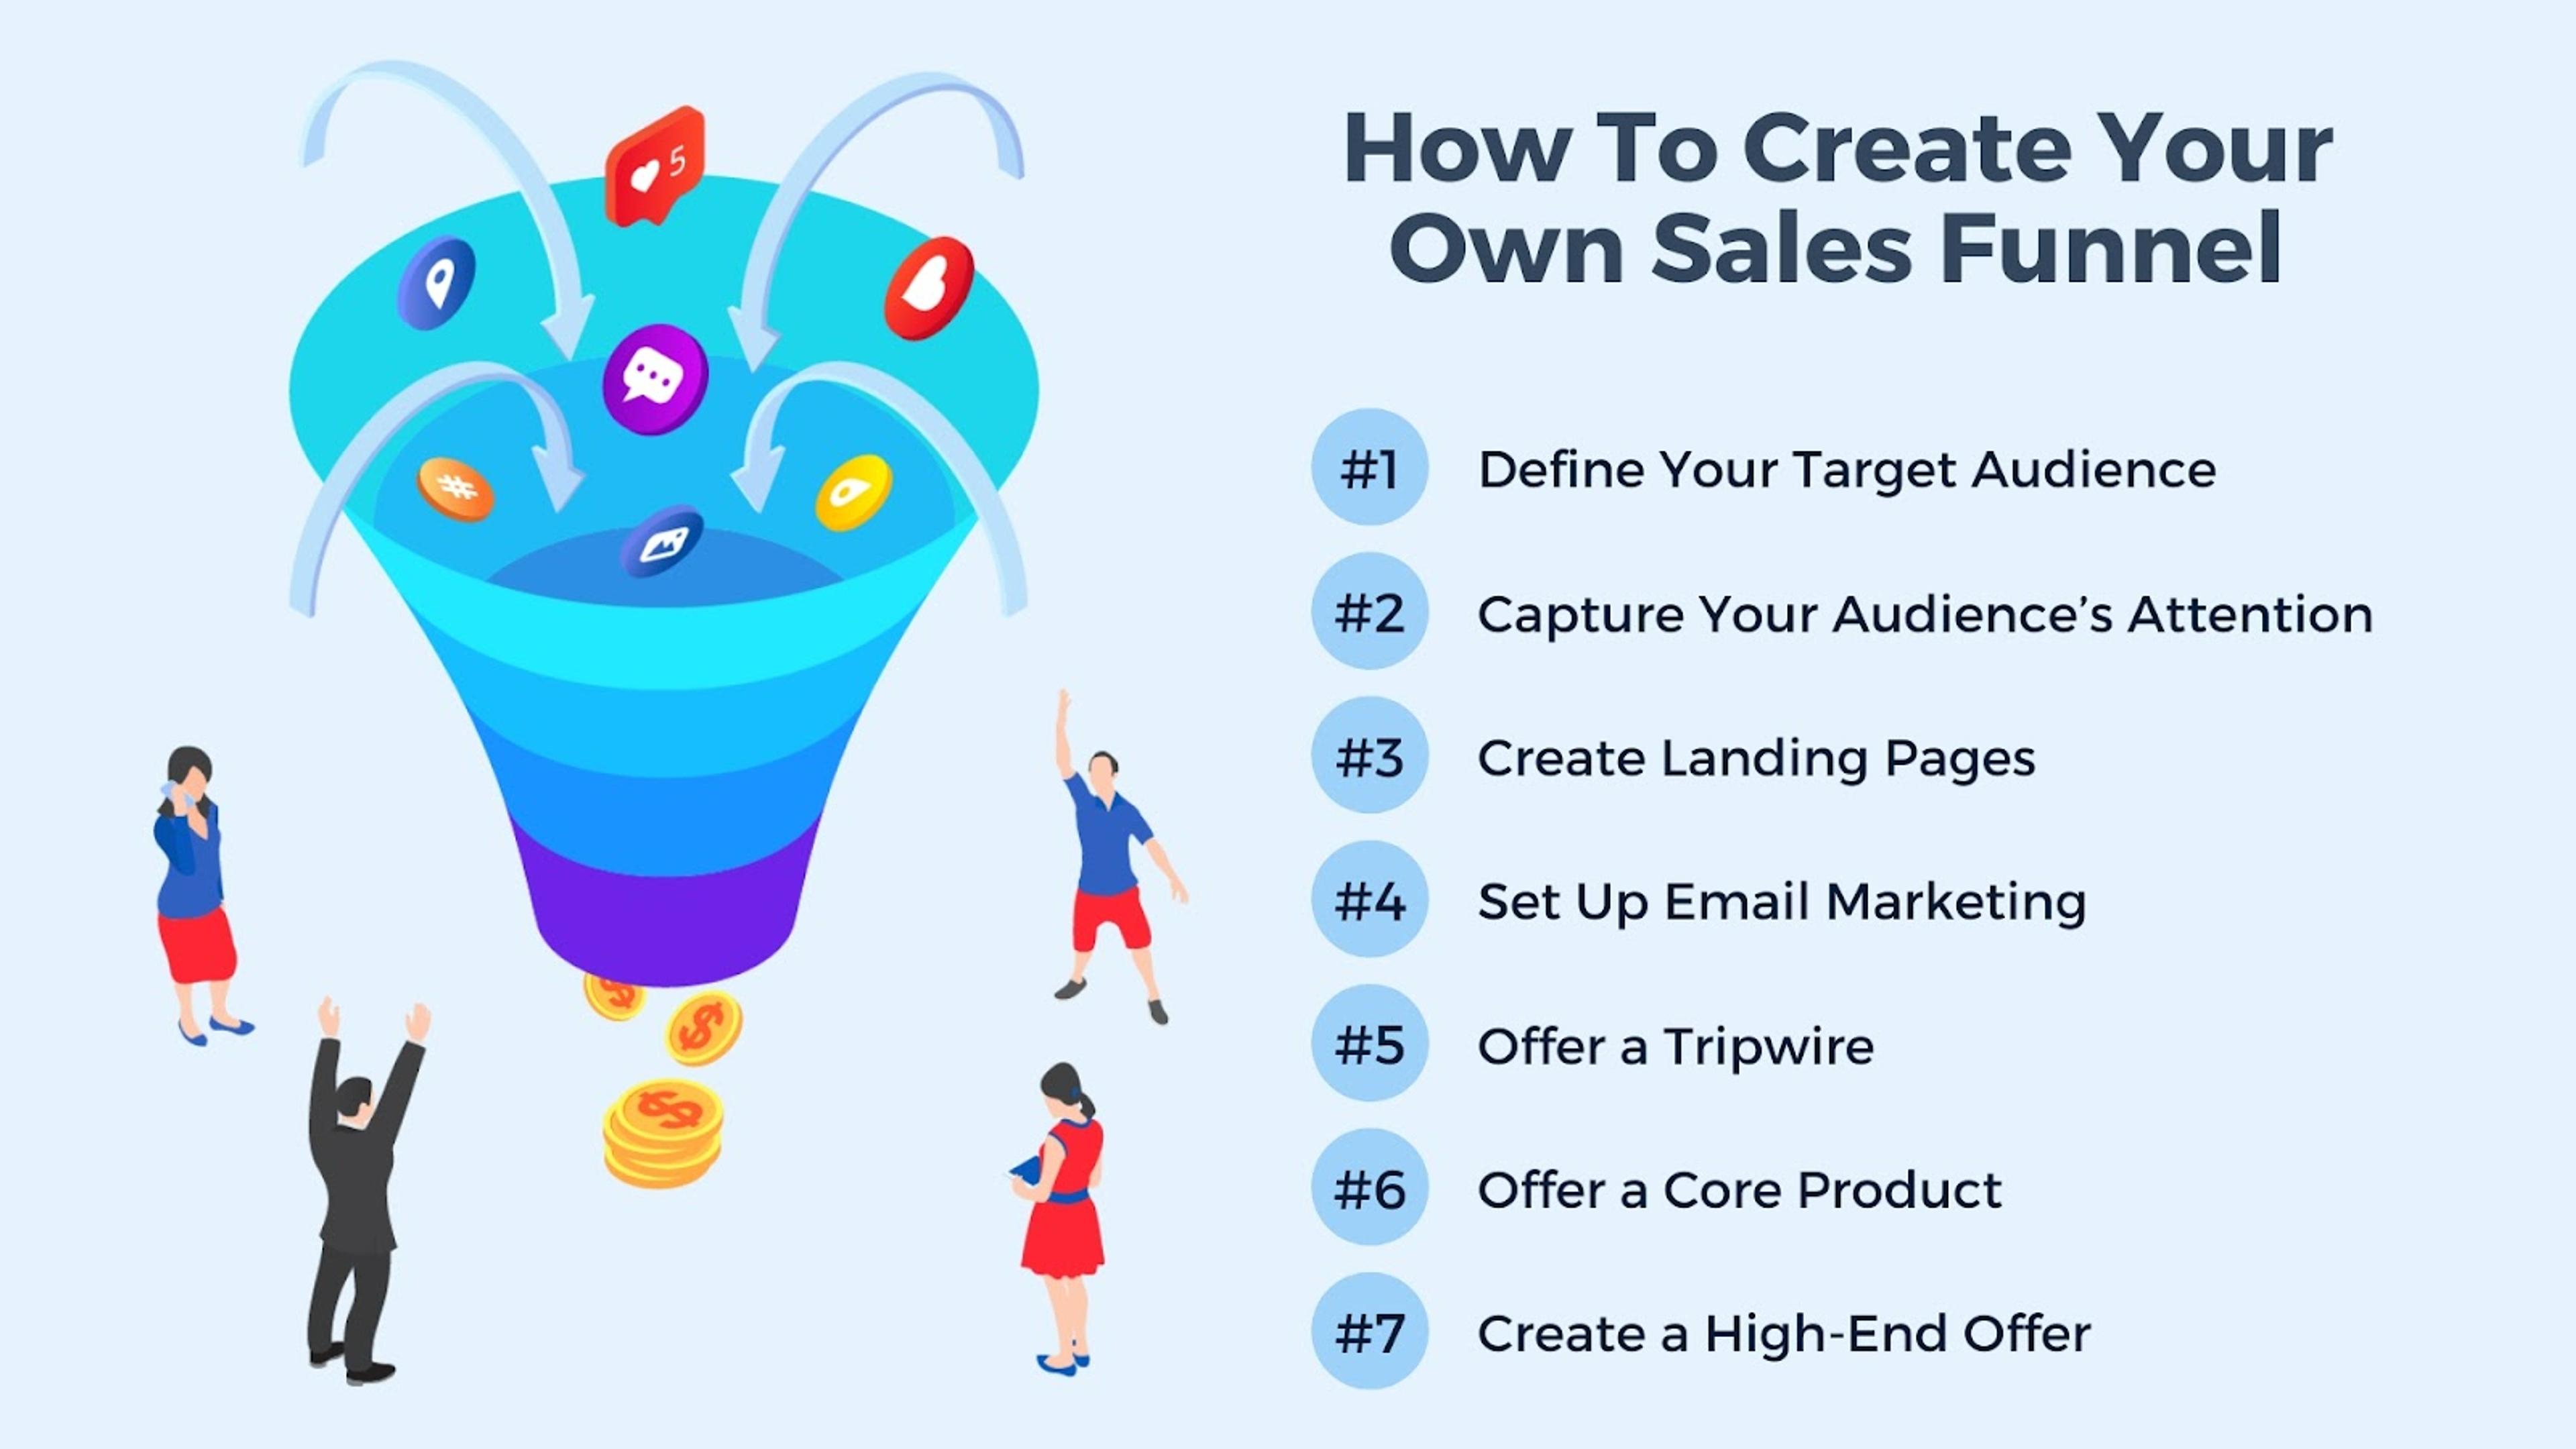 How To Create Your Own Sales Funnel